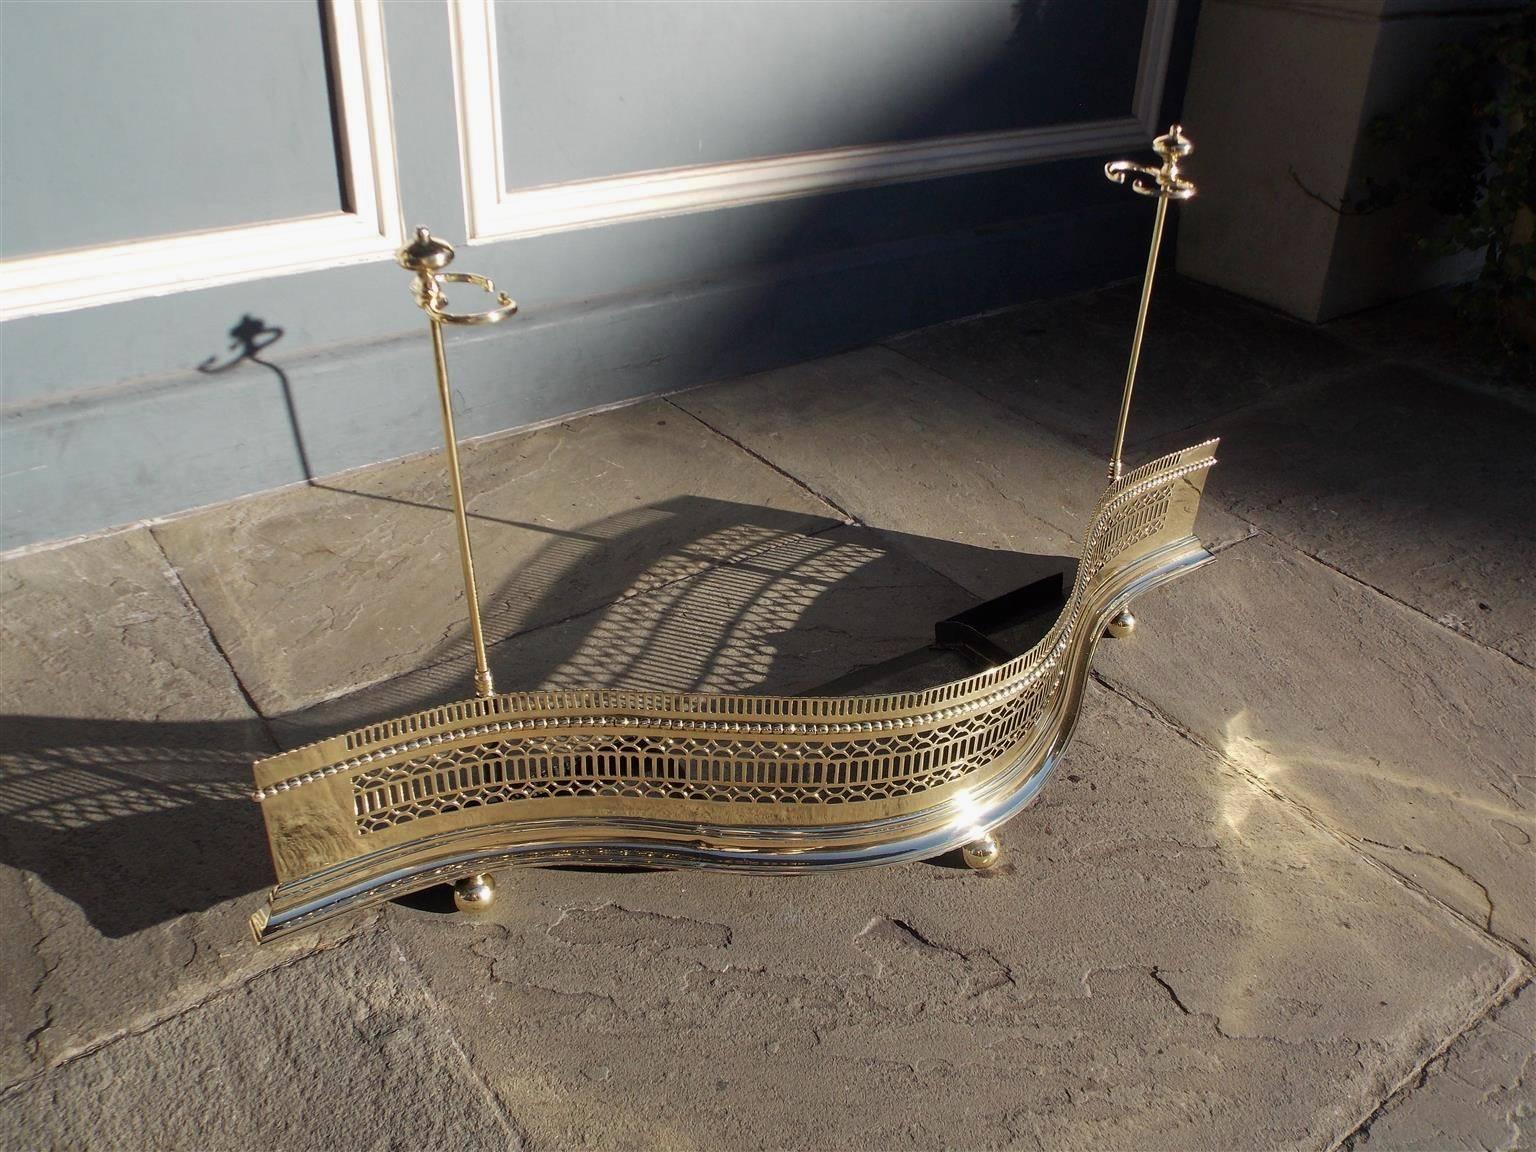 English brass serpentine fire fender with decorative pierced hand chased gallery, single row of beading, flanking side tool holders, and terminating on a molded edge base with ball feet.  Mid 18th Century.  Fender is 23